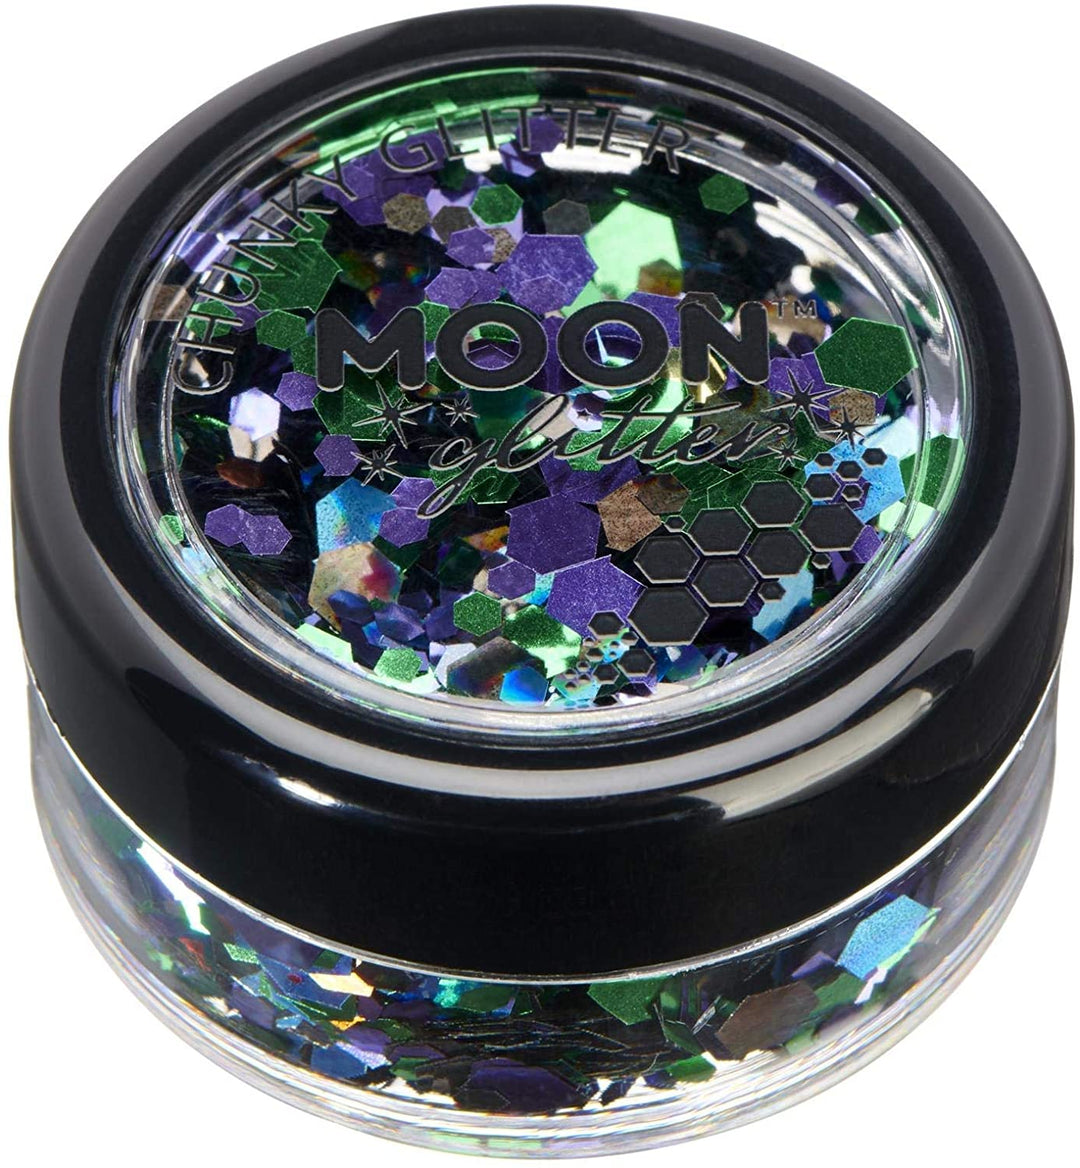 Mystic Chunky Glitter by Moon Glitter - Galaxy - Cosmetic Festival Makeup Glitter for Face, Body, Nails, Hair, Lips - 3g